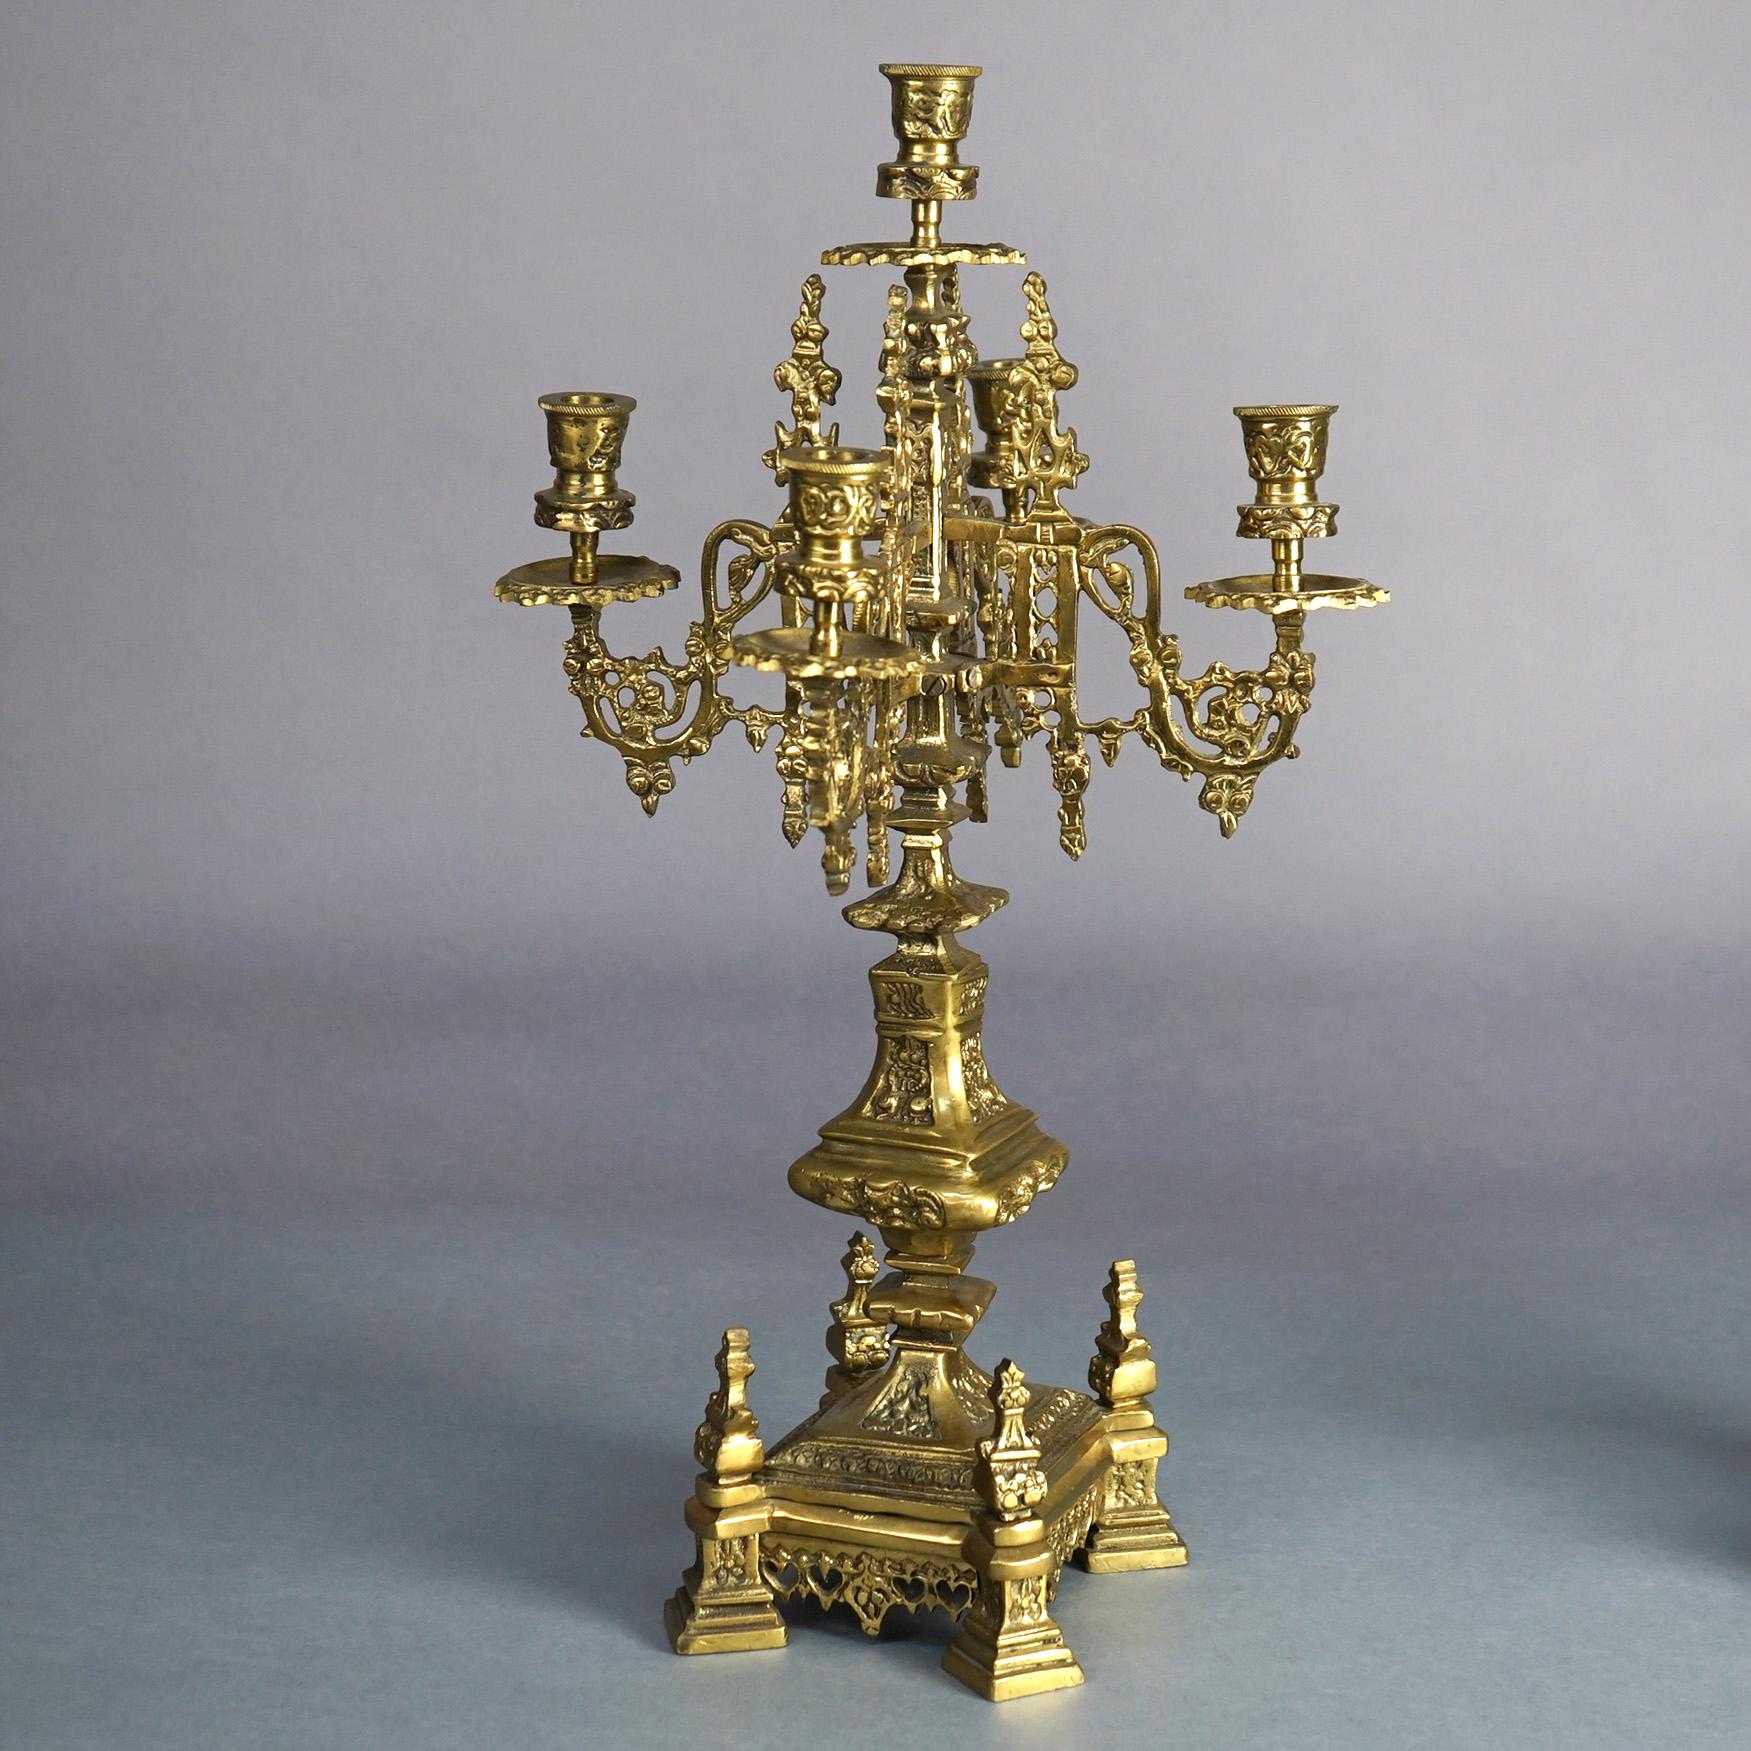 Antique Pair Gothic Revival Bronzed Five-Light & Footed Candelabra with Foliate and Architectural Elements, C1850

Measures - 21.25